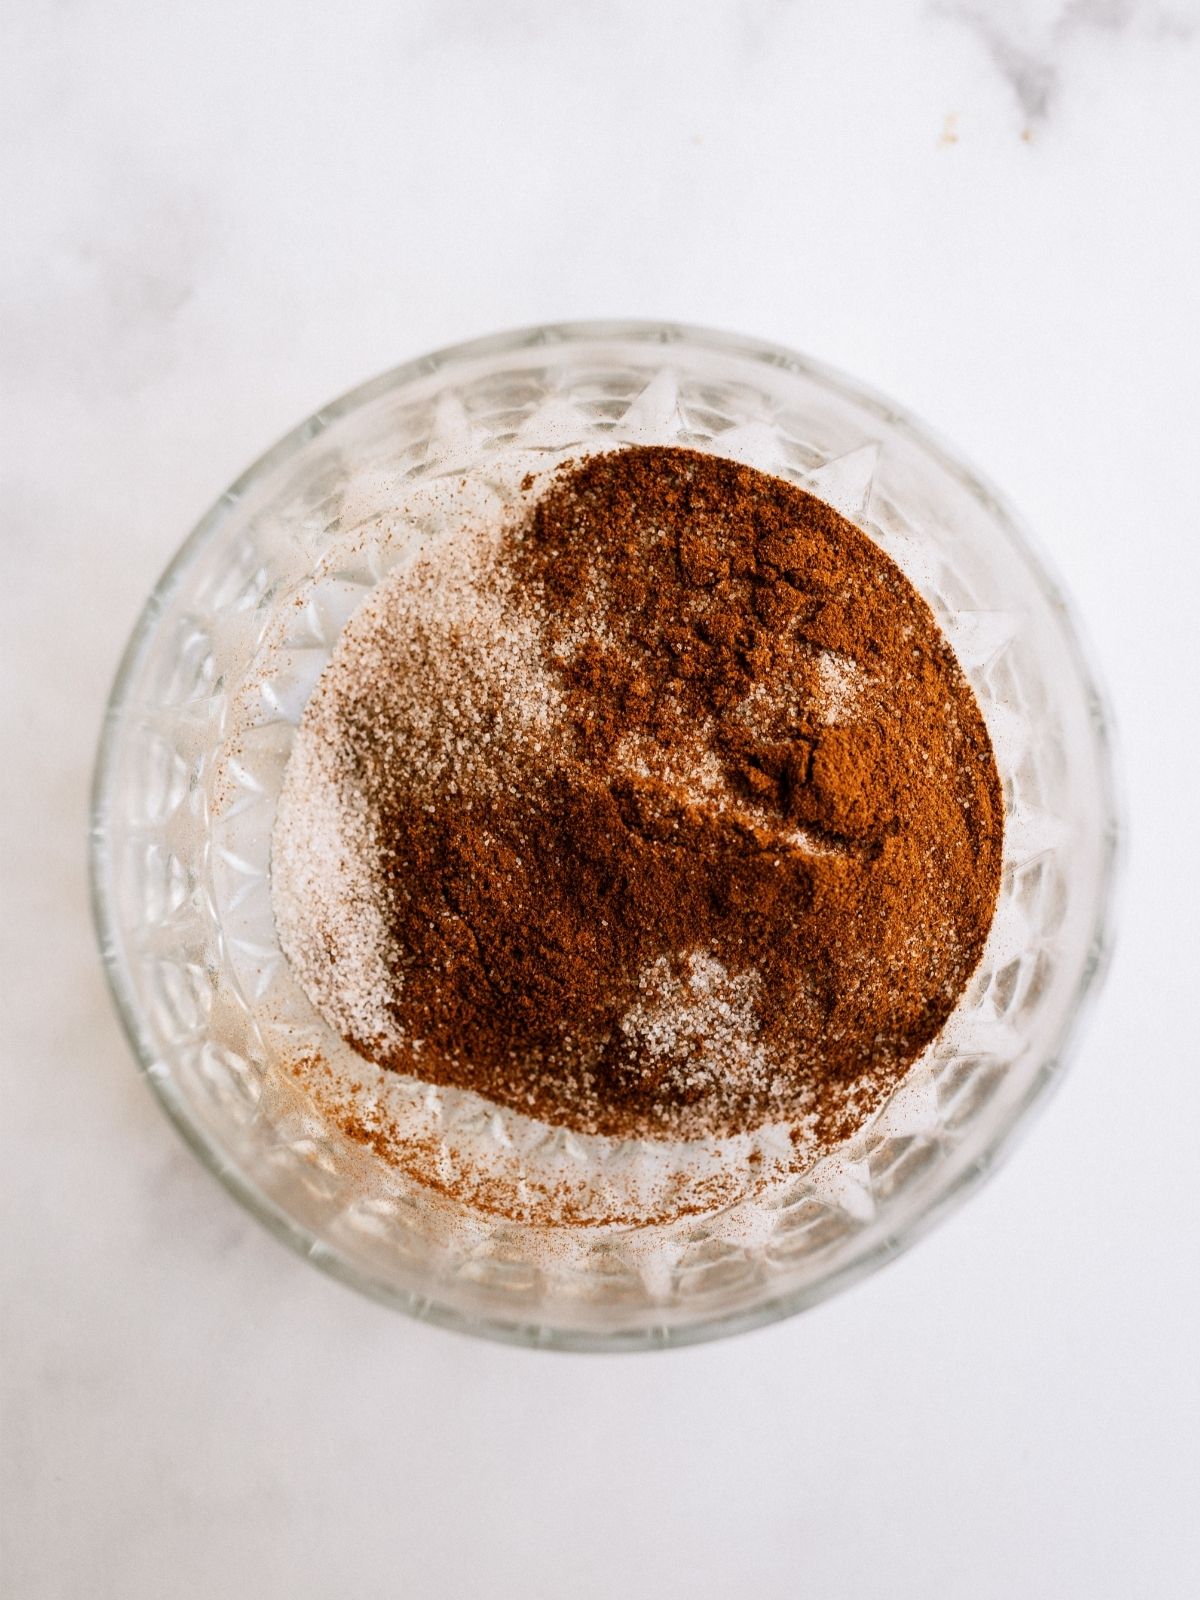 Ingredients for Cinnamon Mixture in glass bowl